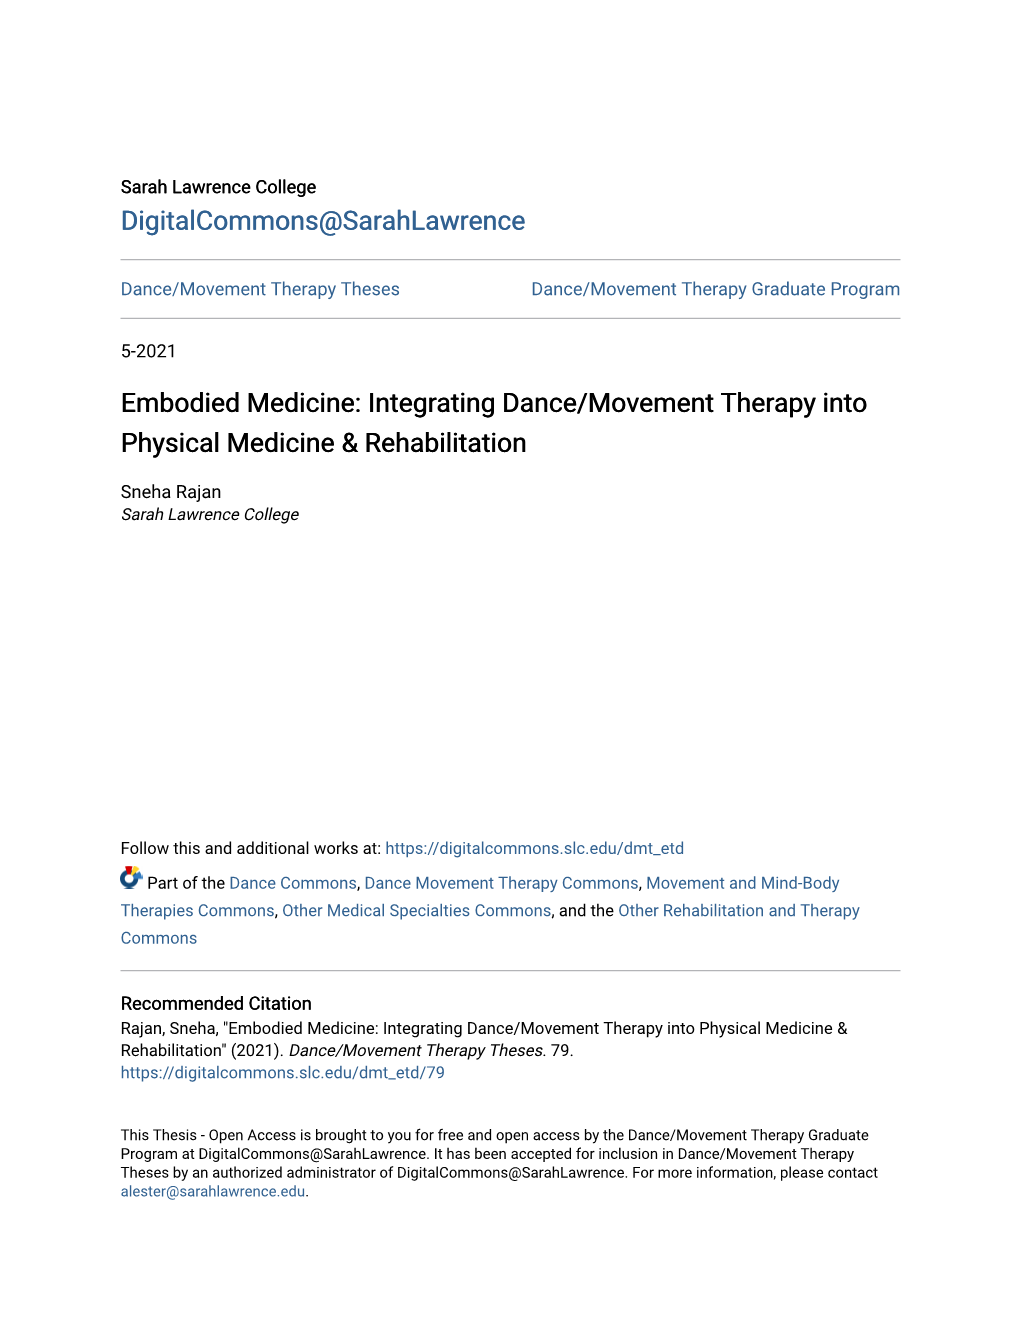 Integrating Dance/Movement Therapy Into Physical Medicine & Rehabilitation